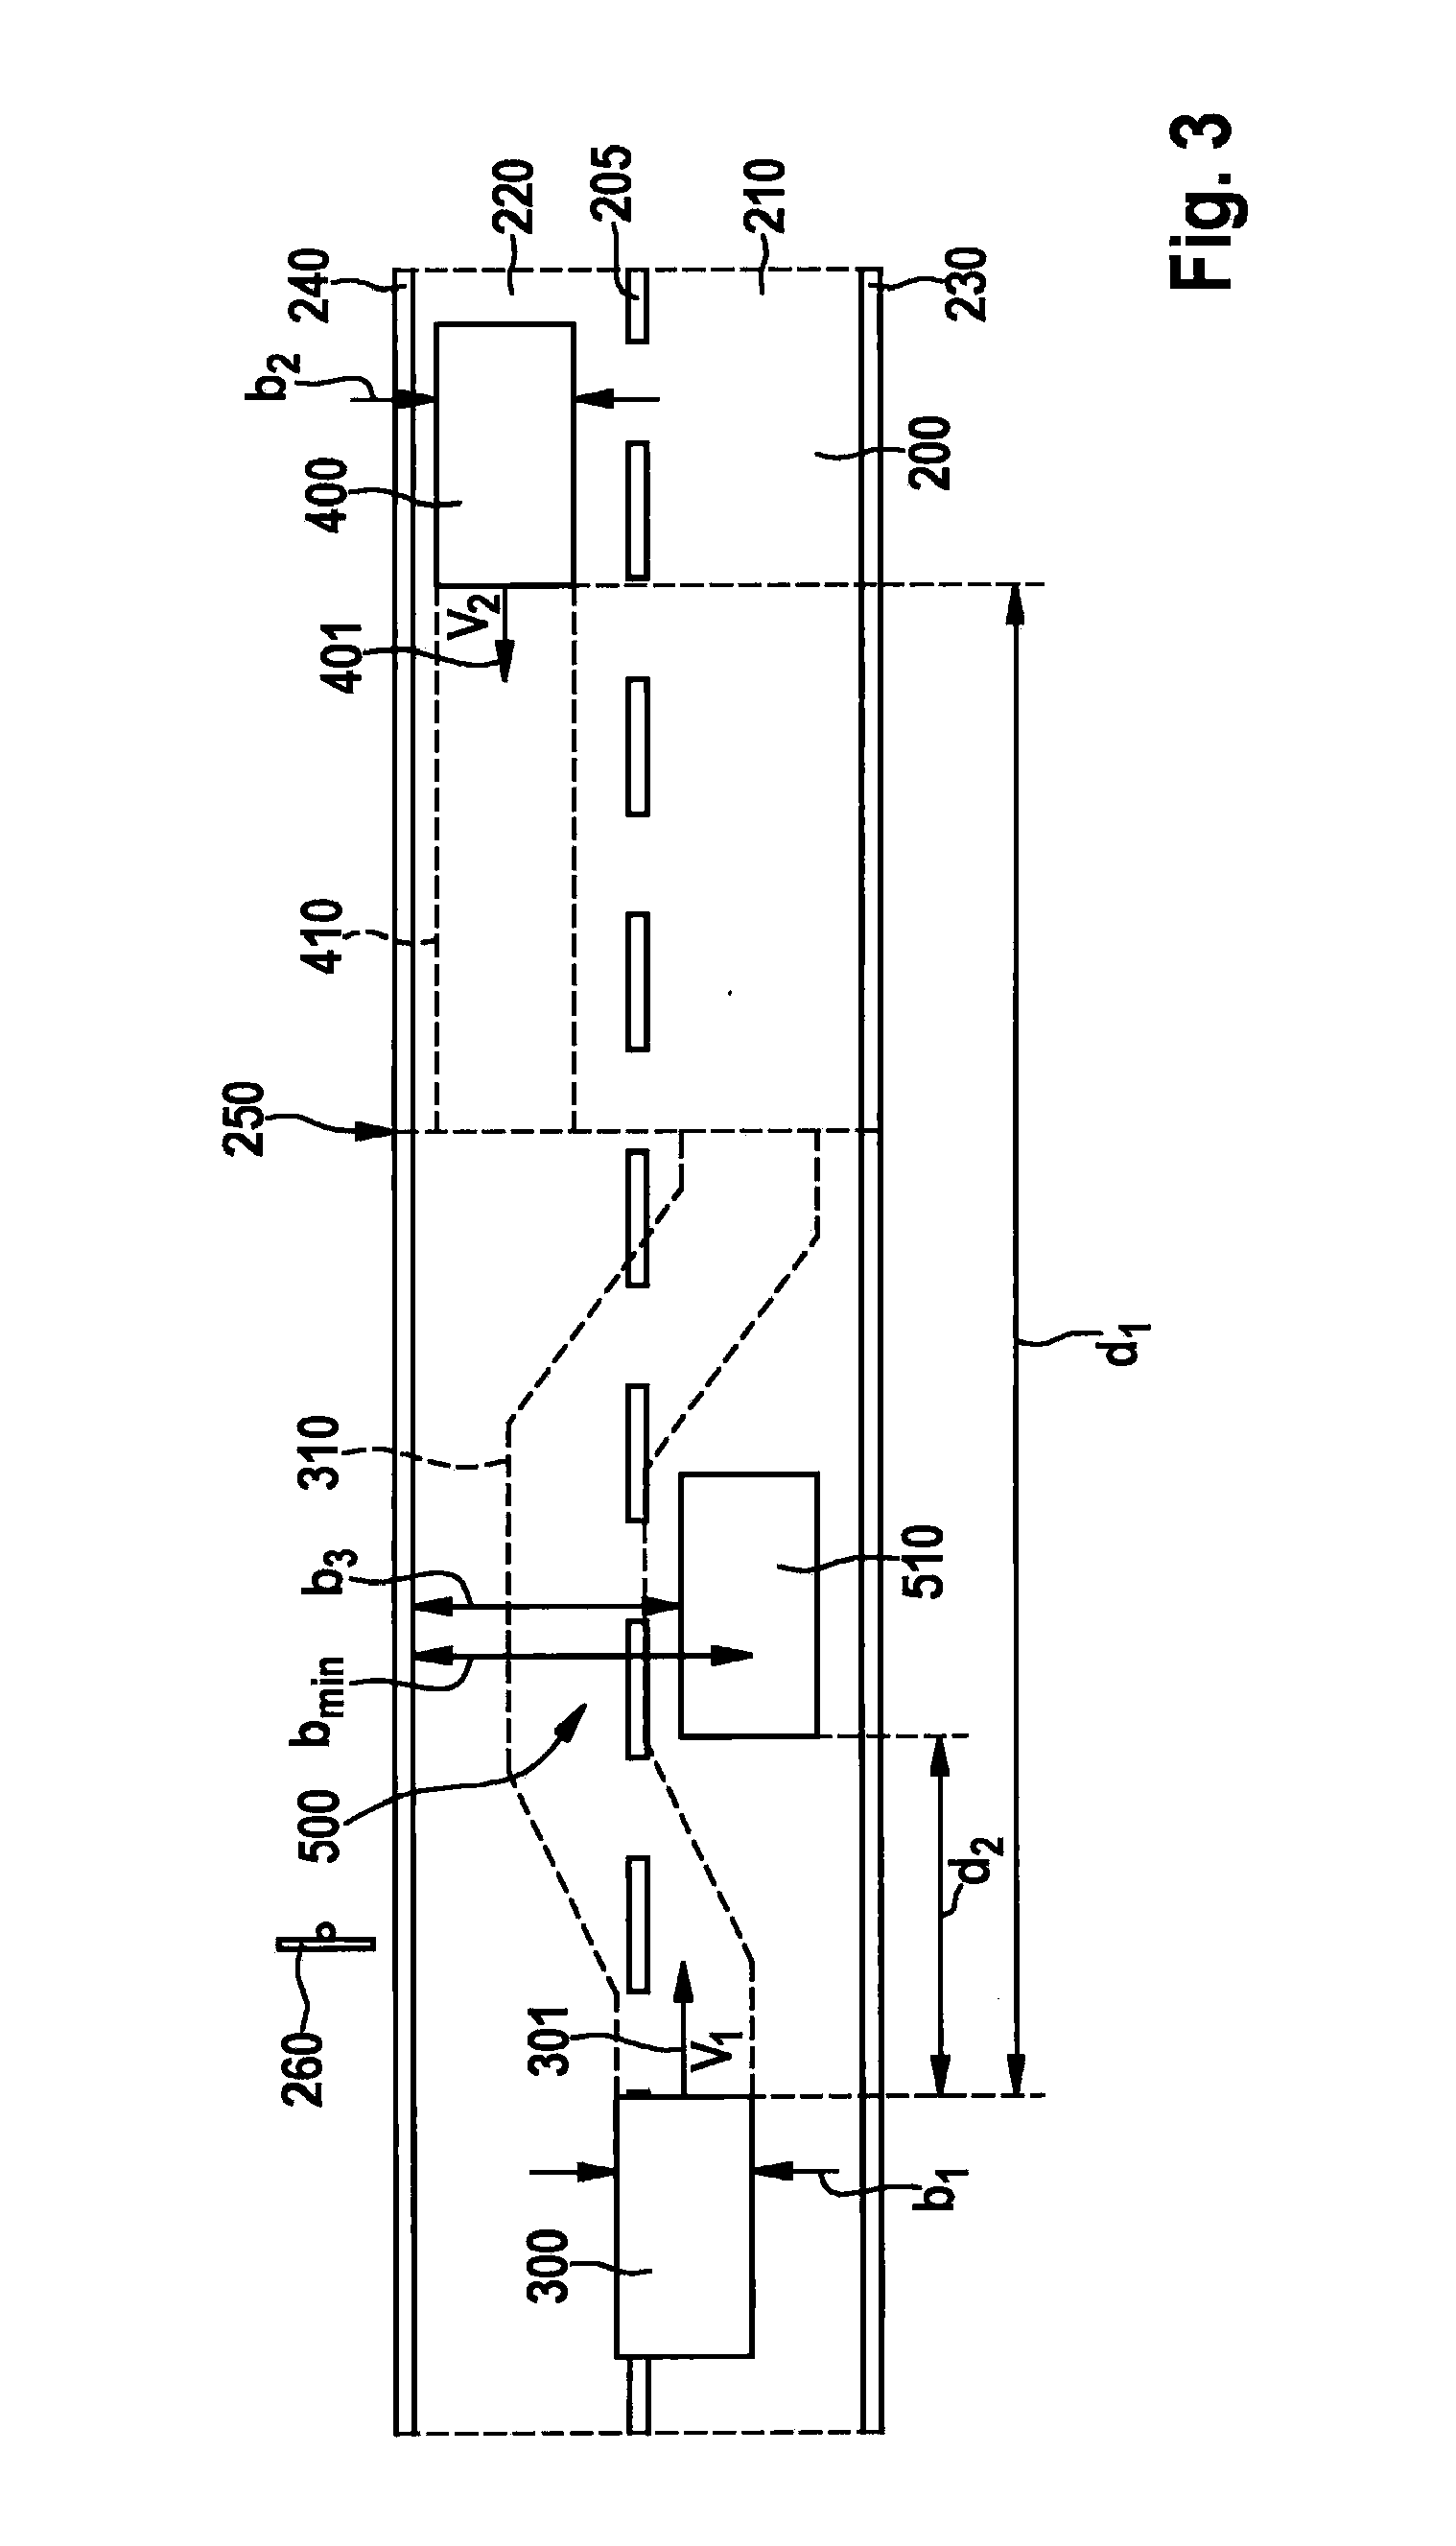 Driver-assistance system and method for operating the driver-assistance system